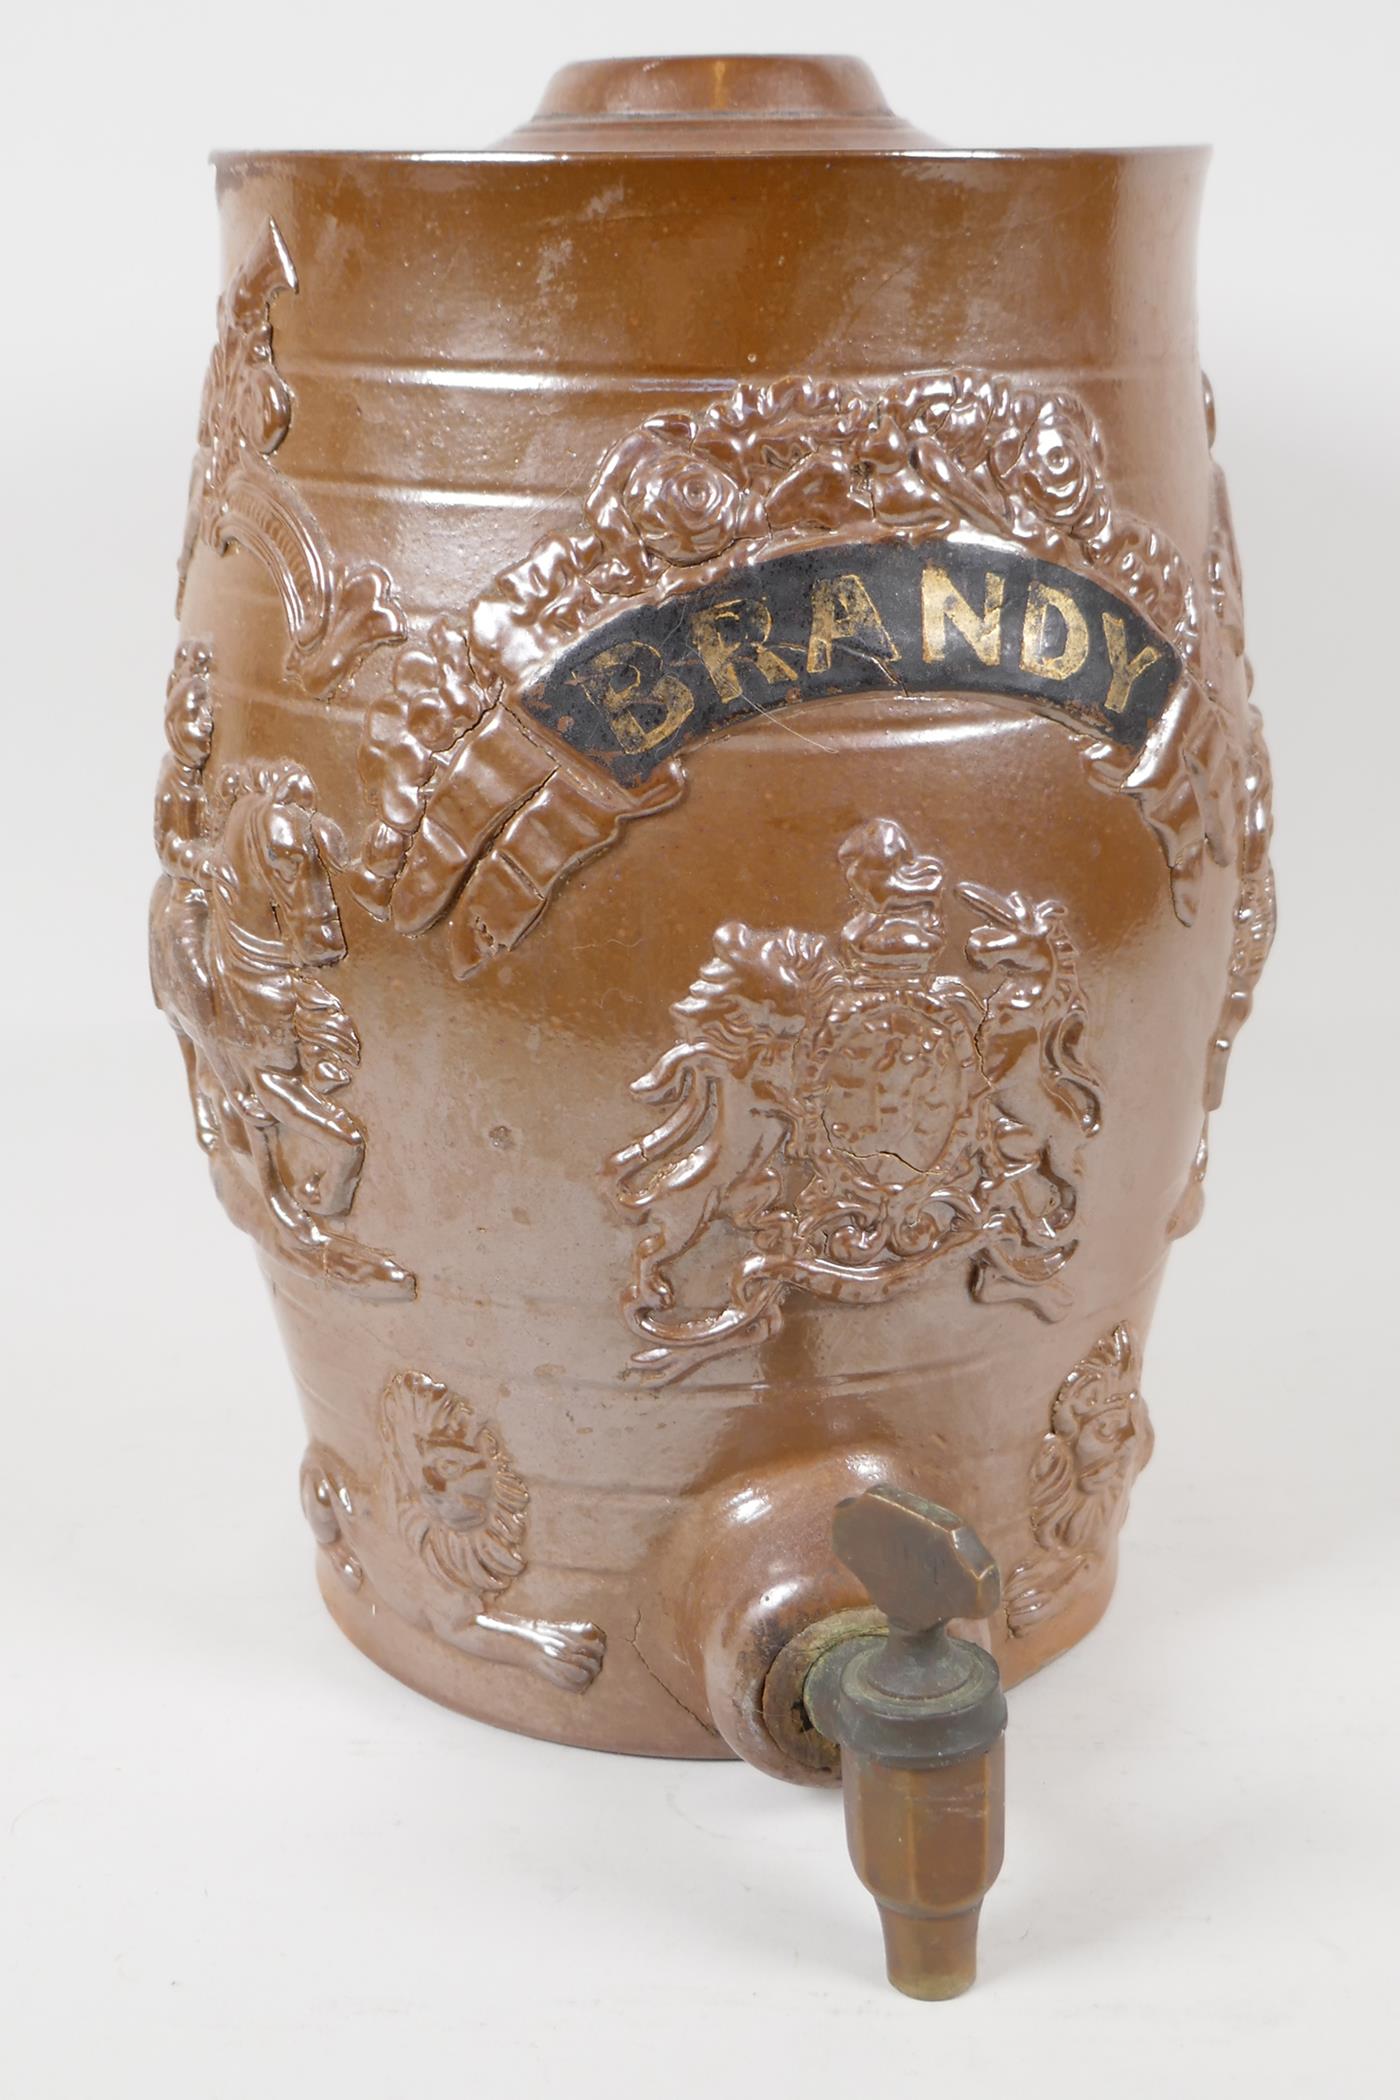 A C19th salt glazed stoneware brandy barrell, embossed with figures of knights on horseback, lions